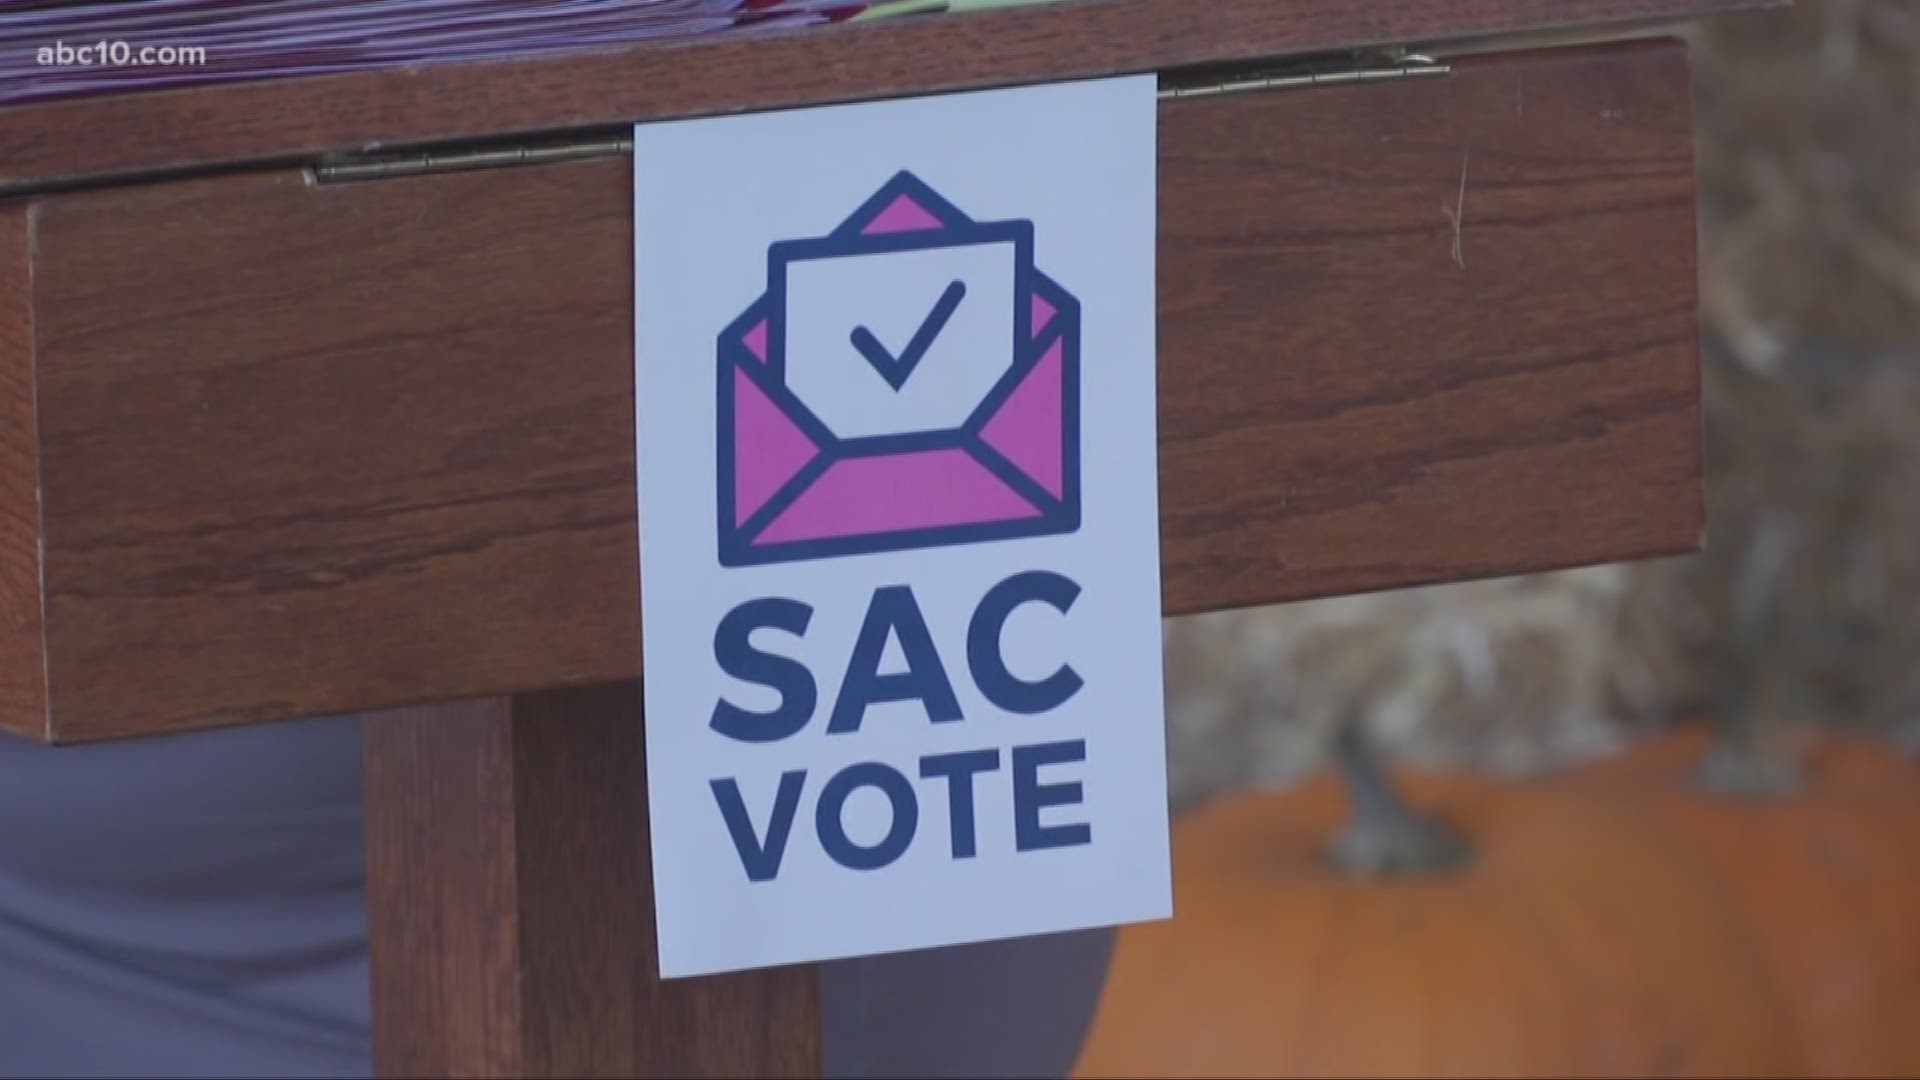 Folks in Sacramento County can now officially vote.